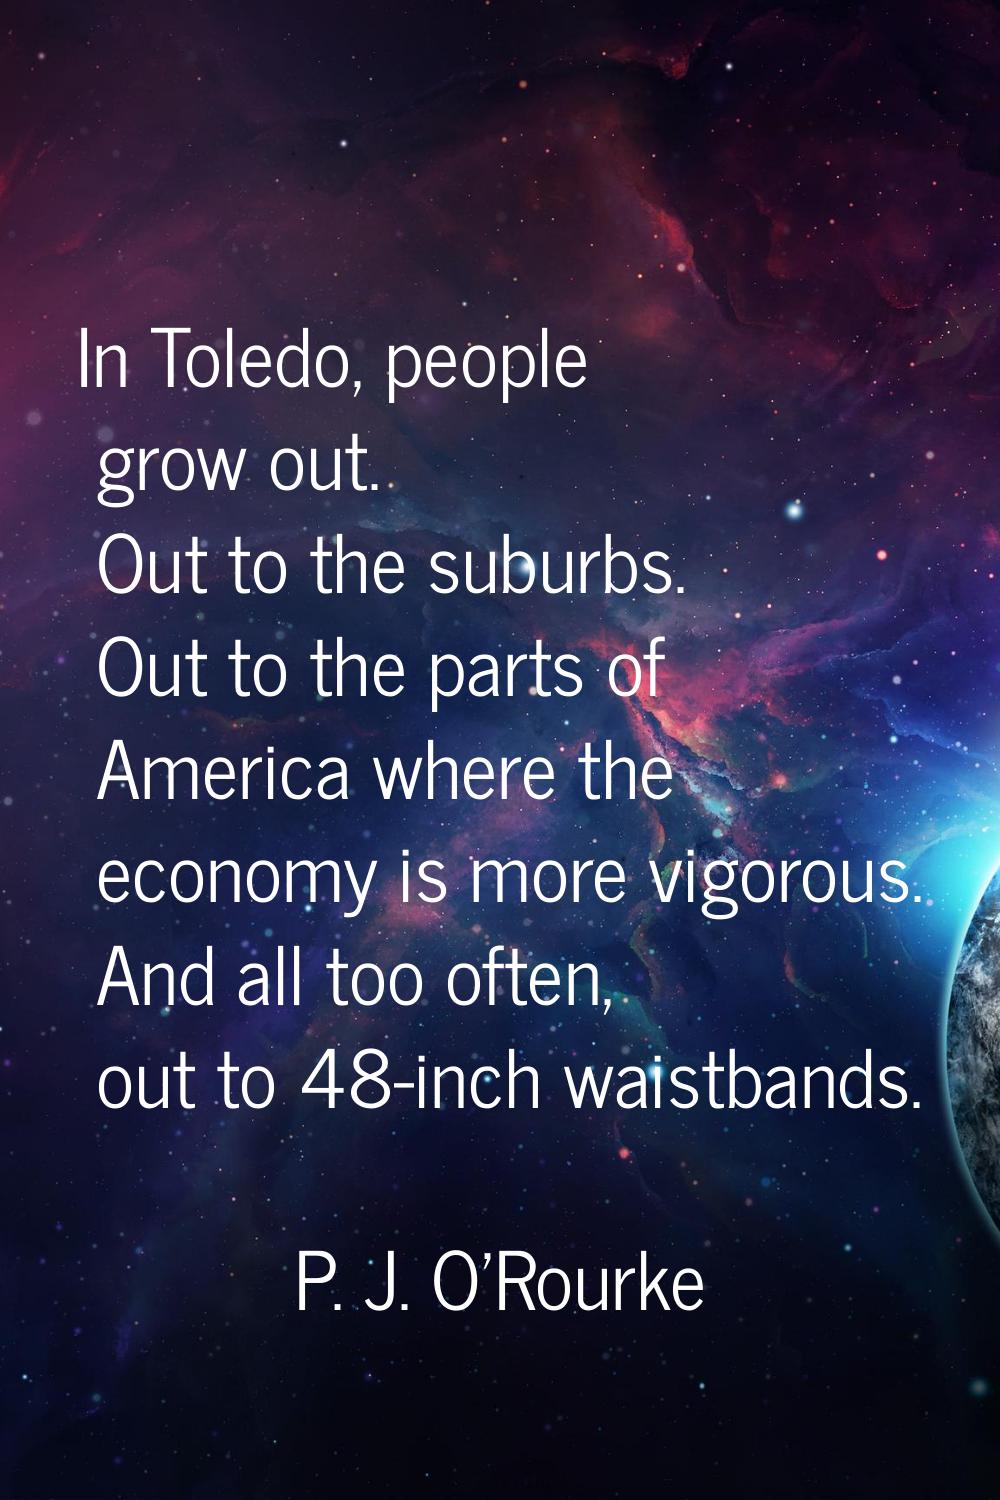 In Toledo, people grow out. Out to the suburbs. Out to the parts of America where the economy is mo